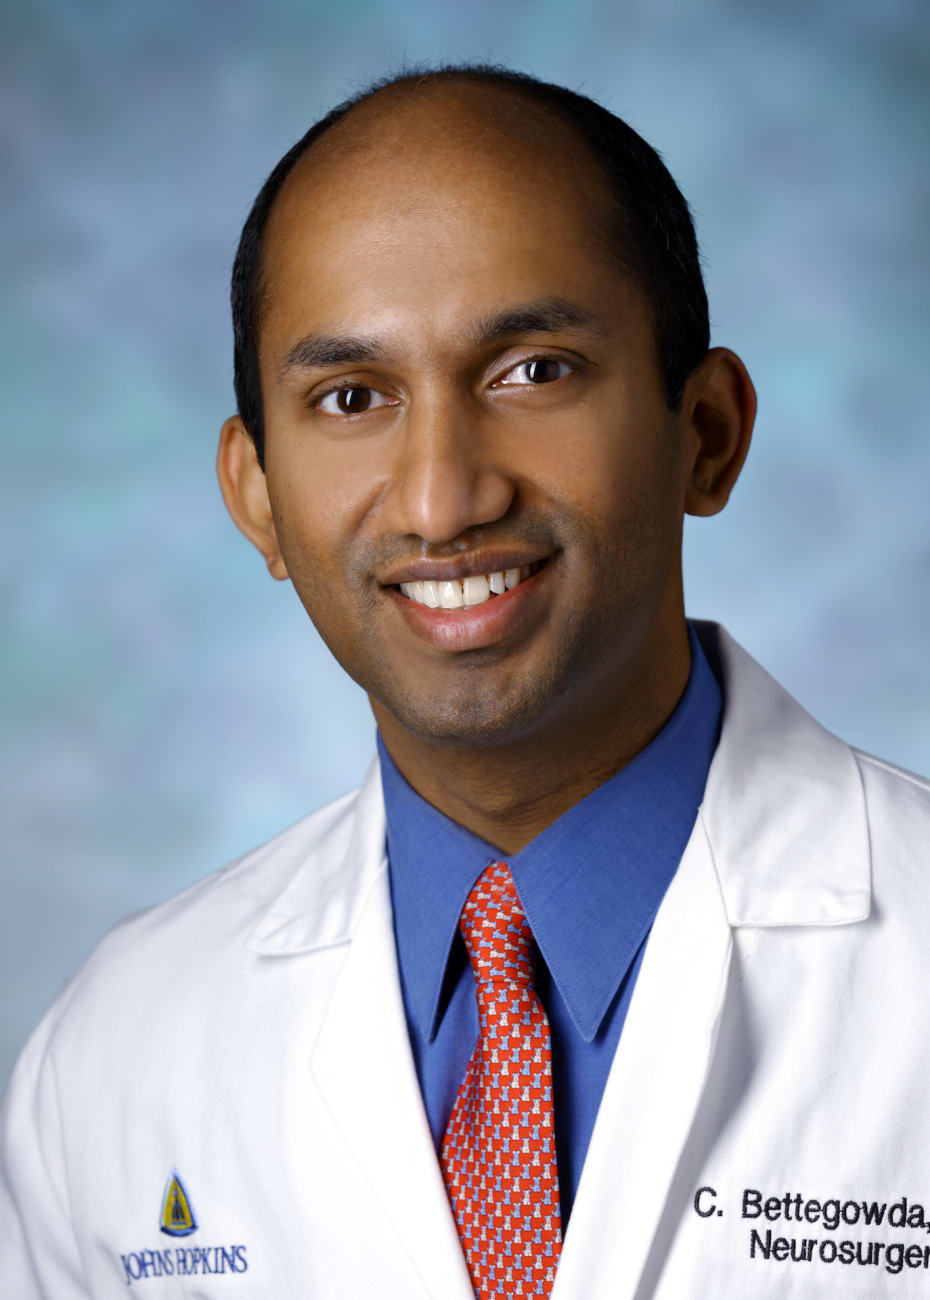 Chetan Beetegowda, in a formal portrait, wearing a white lab coat, royal blue button down shirt and red checkered tie